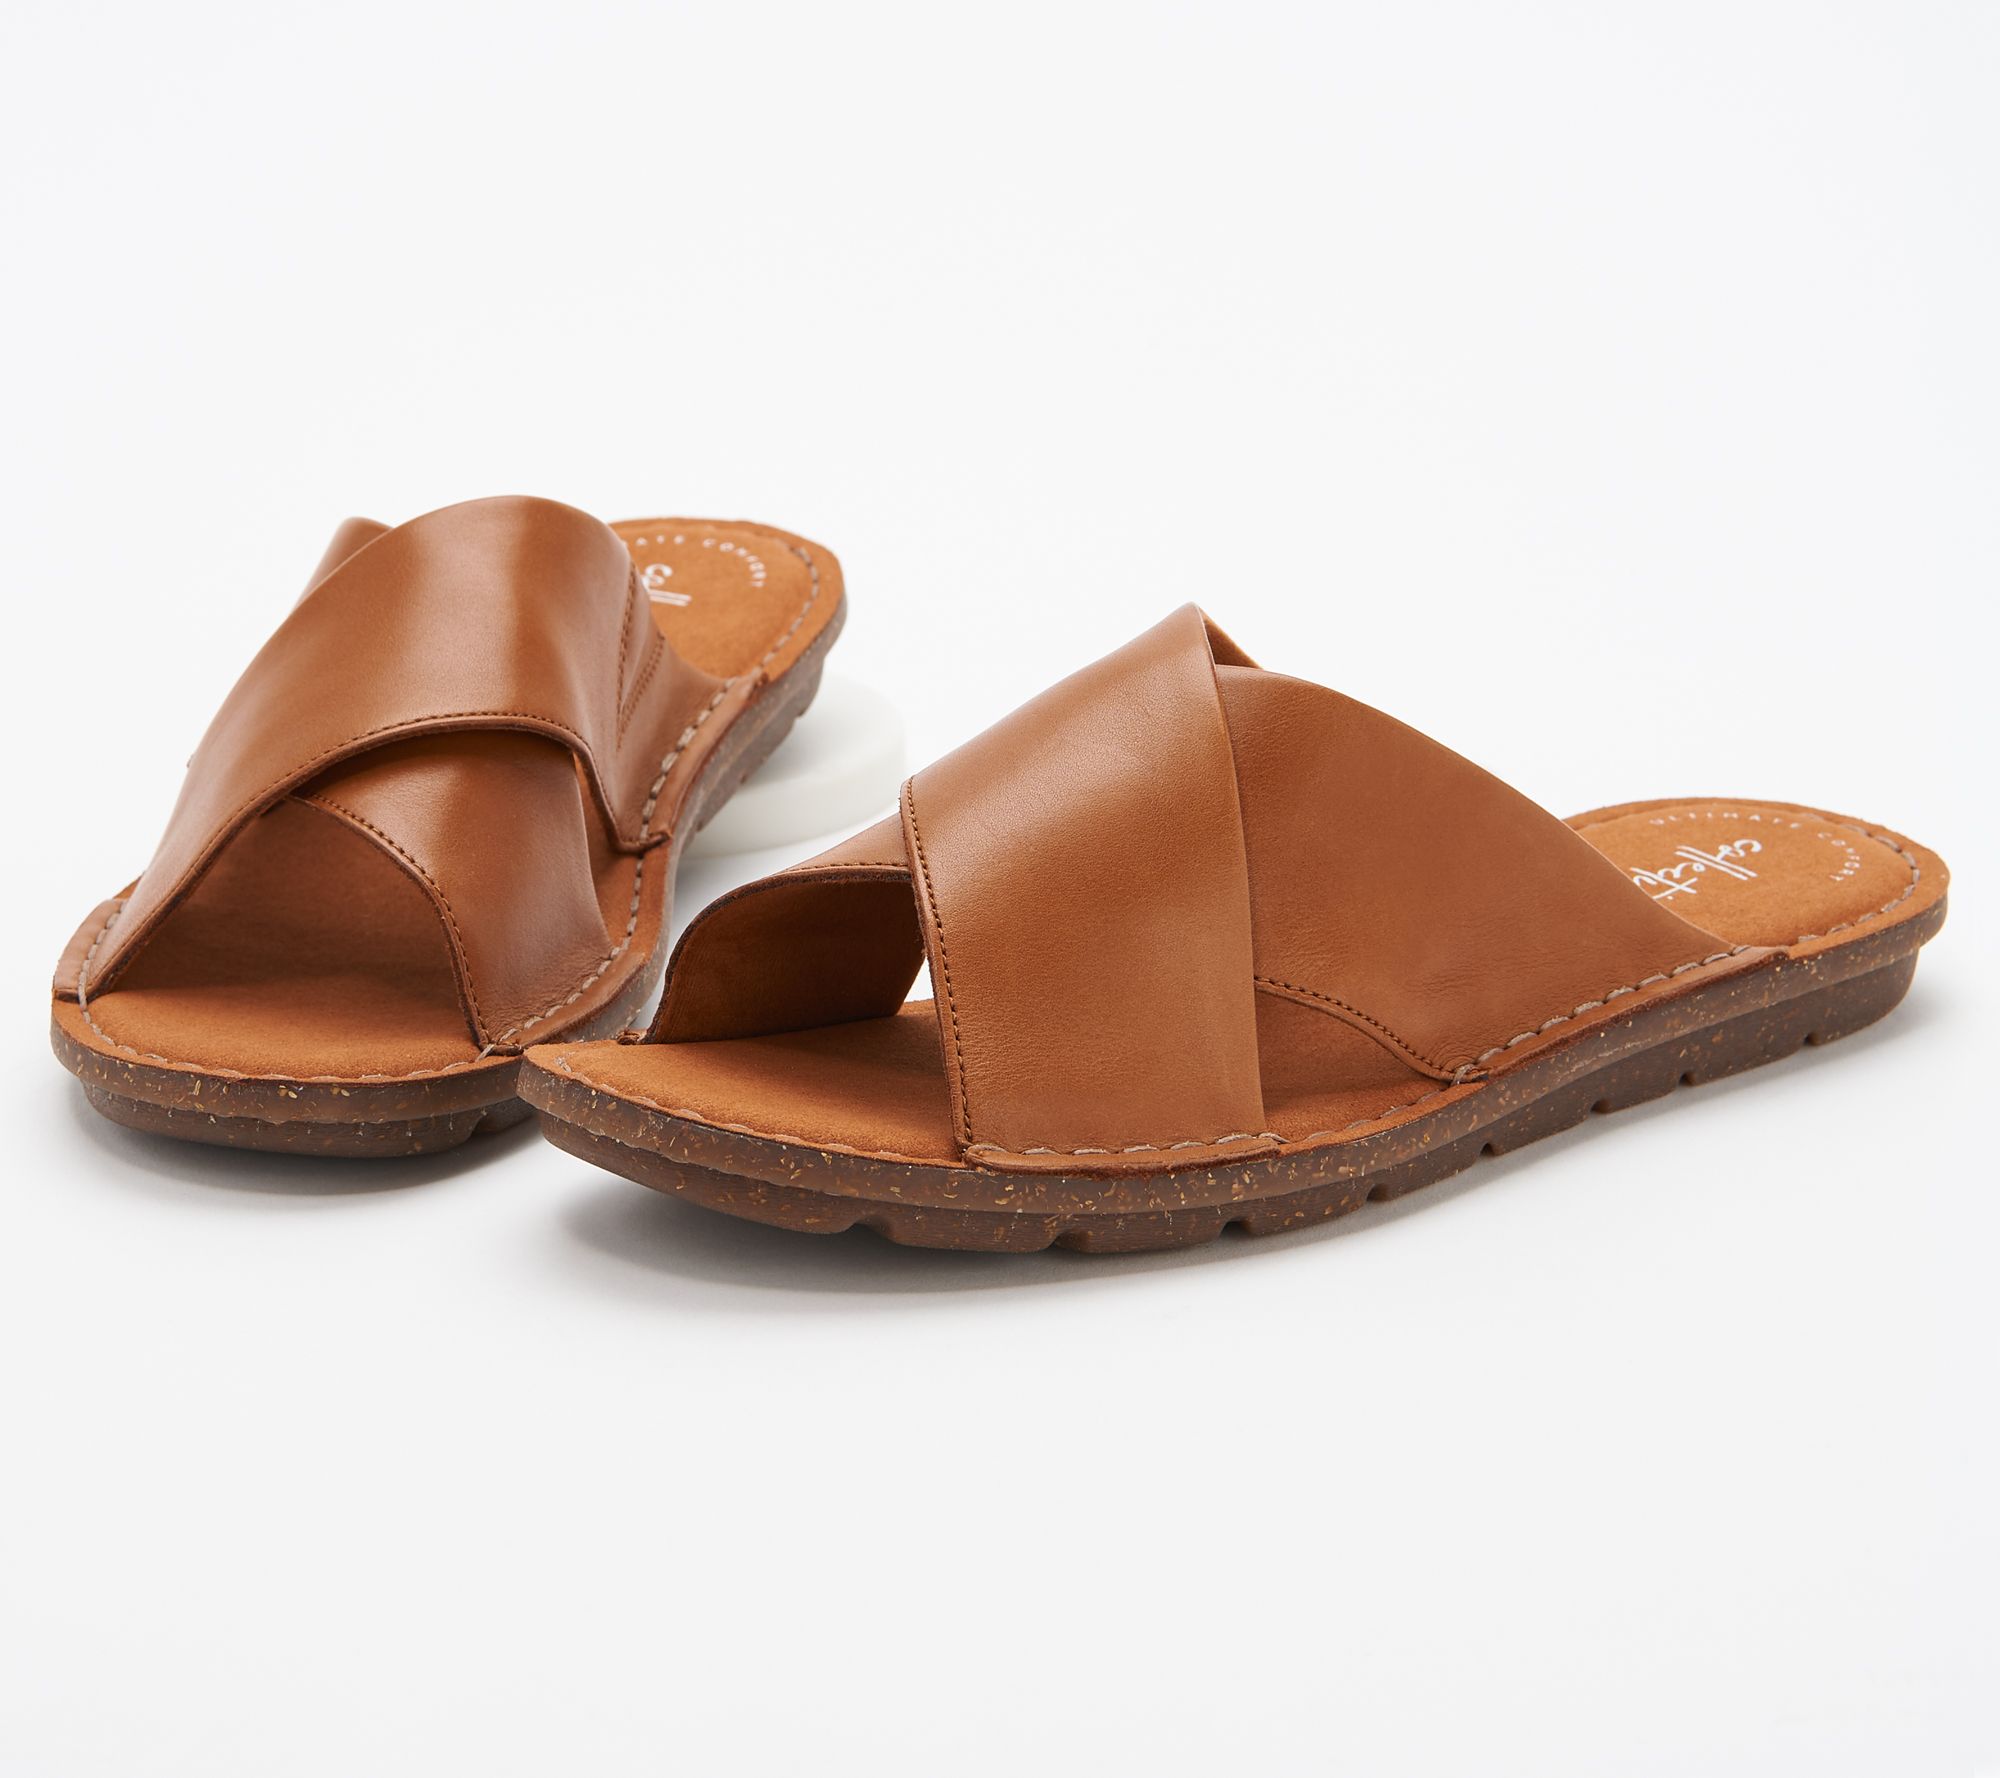 qvc clarks slippers